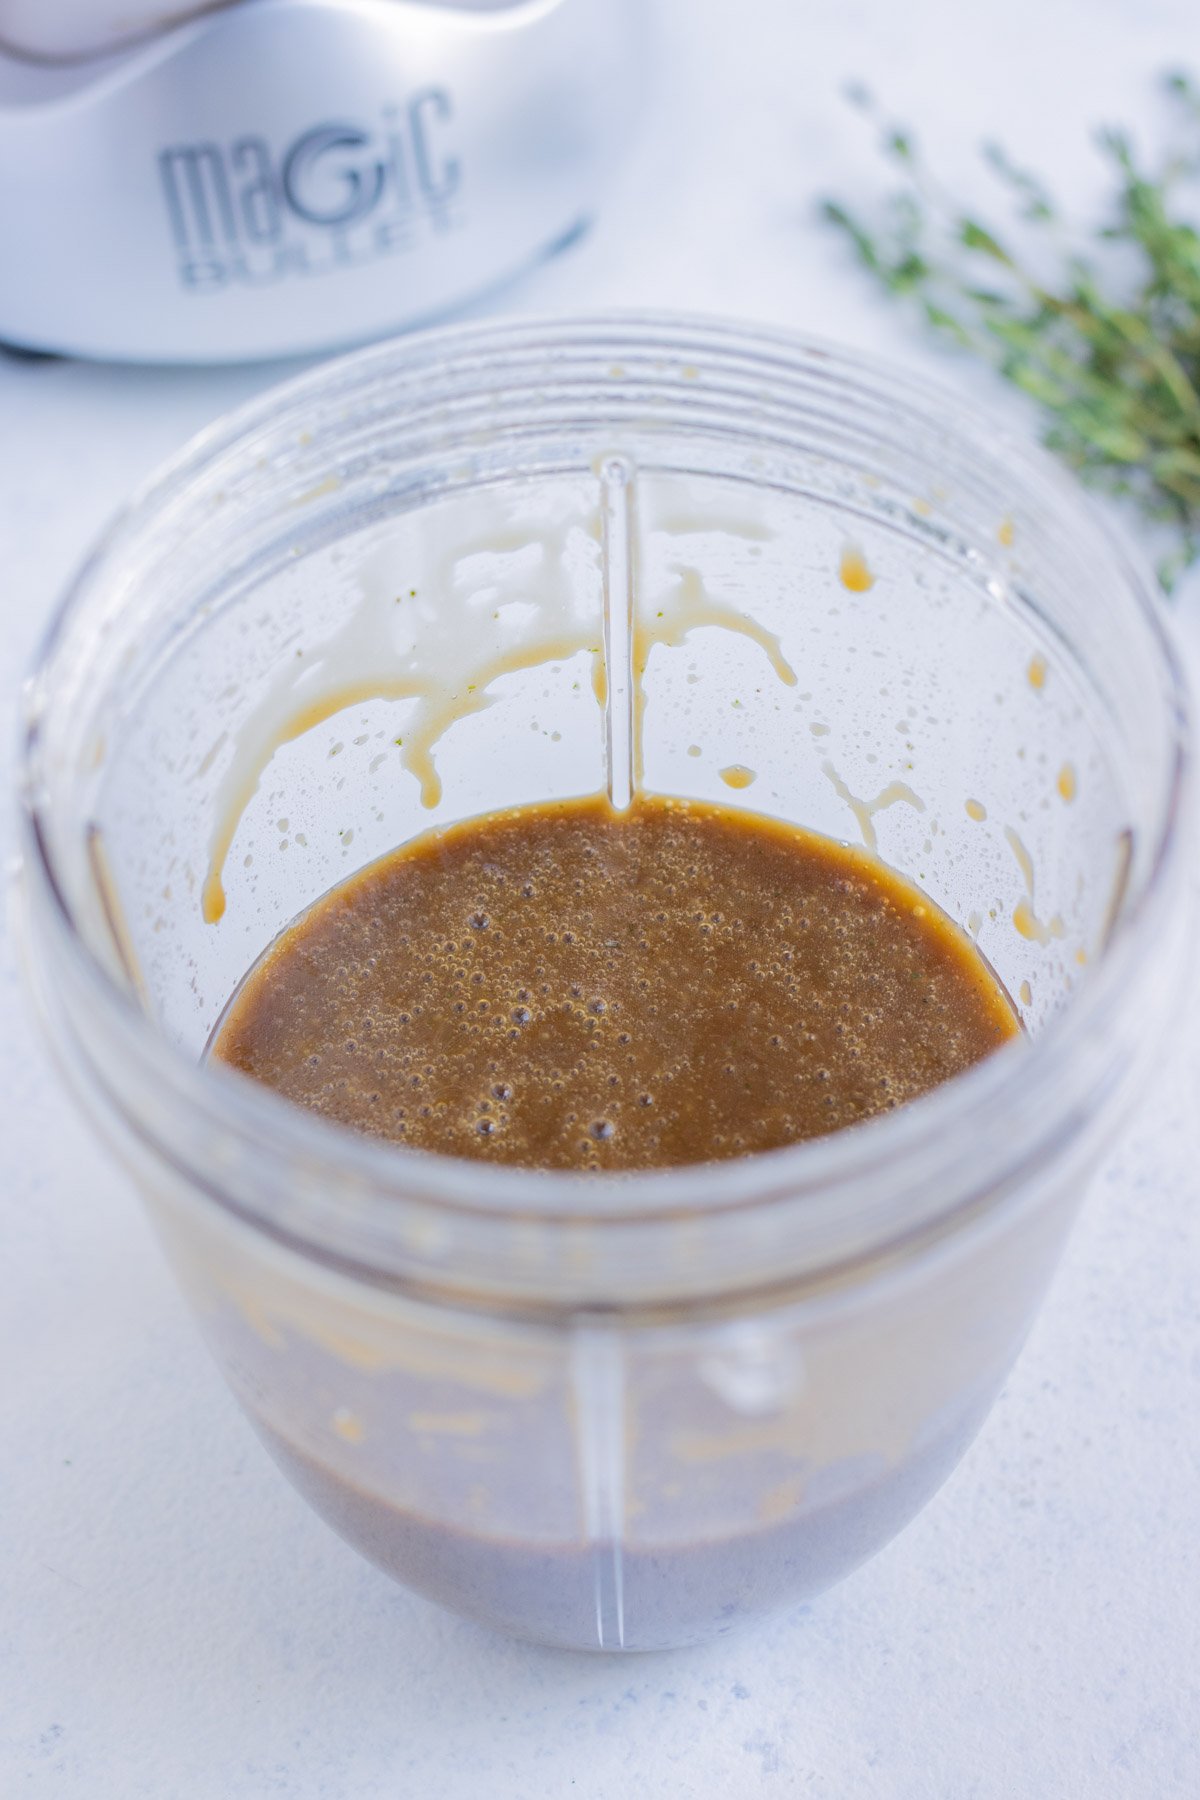 Vinaigrette ingredients are mixed in a blender.